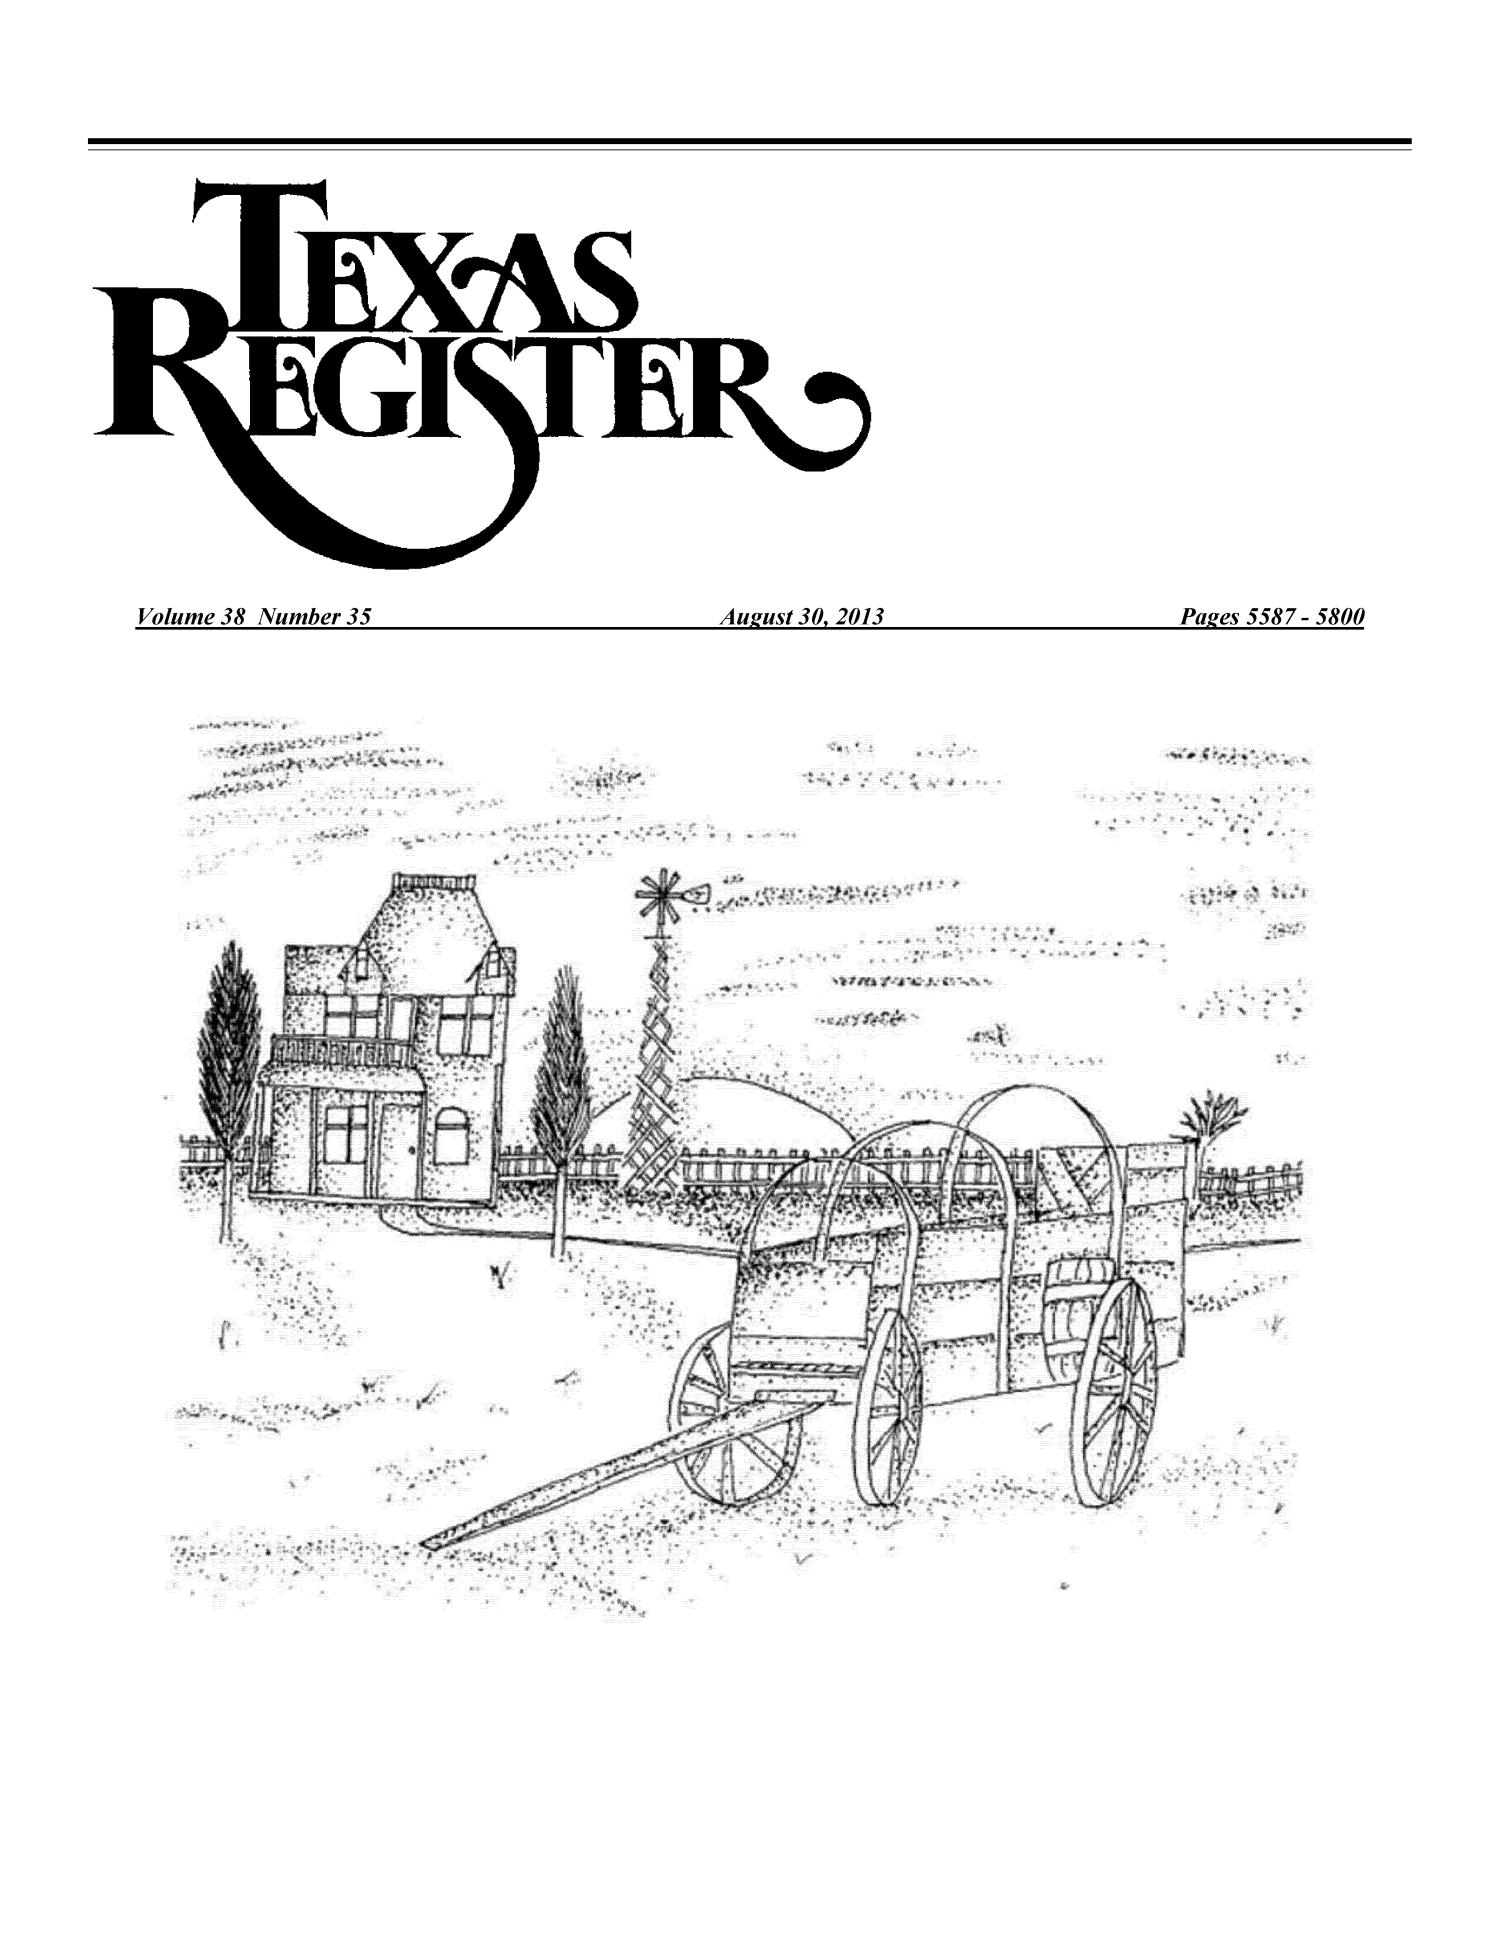 Texas Register, Volume 38, Number 35, Pages 5587-5800, August 30, 2013
                                                
                                                    Title Page
                                                